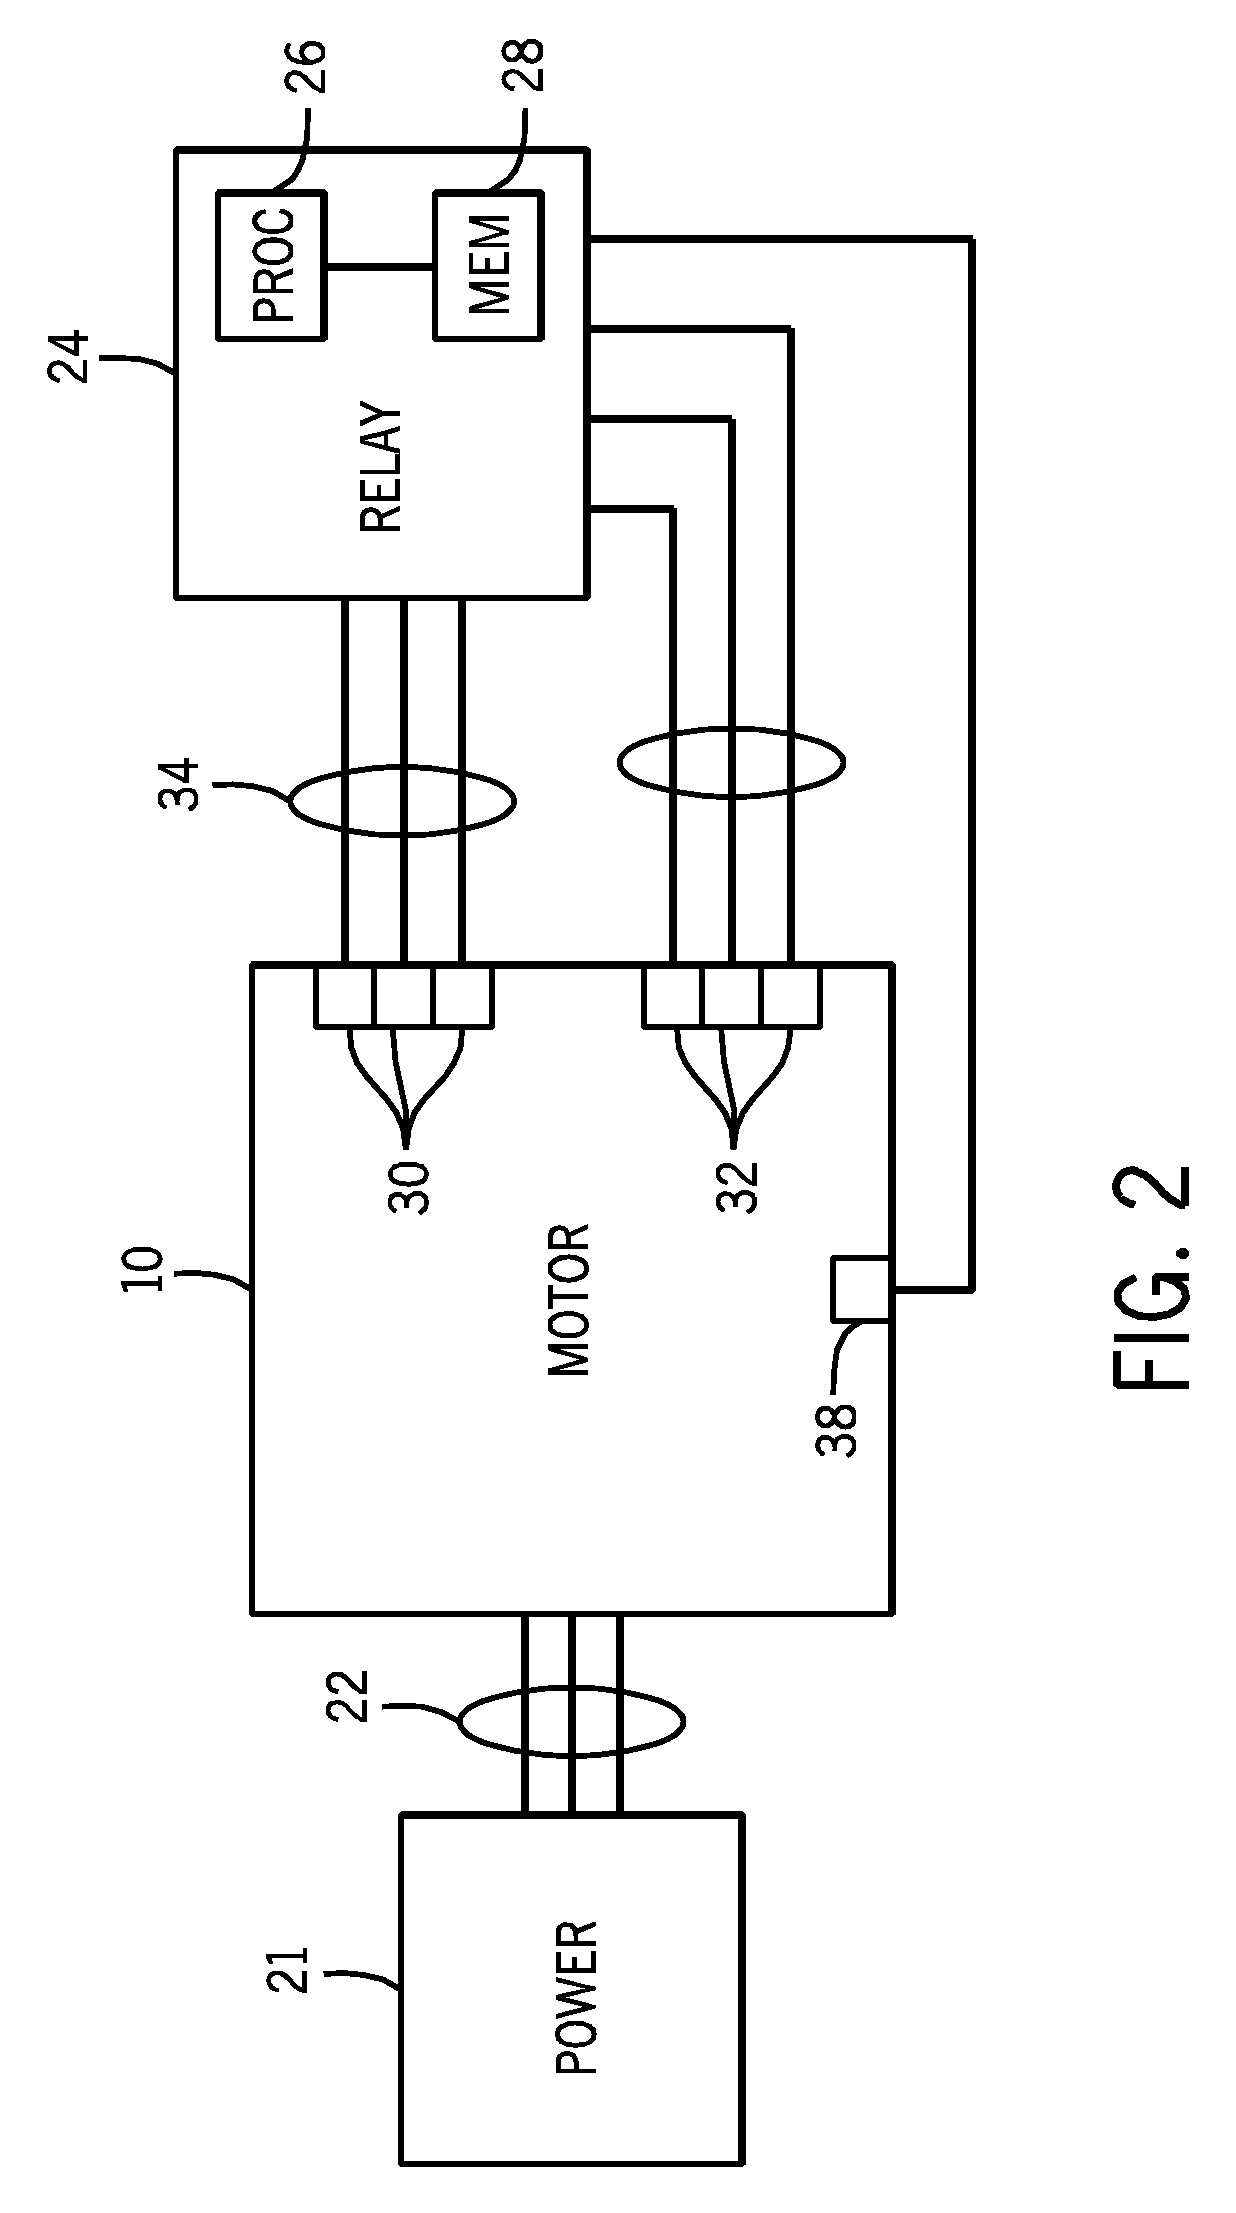 Stator turn fault detection apparatus and method for induction machine